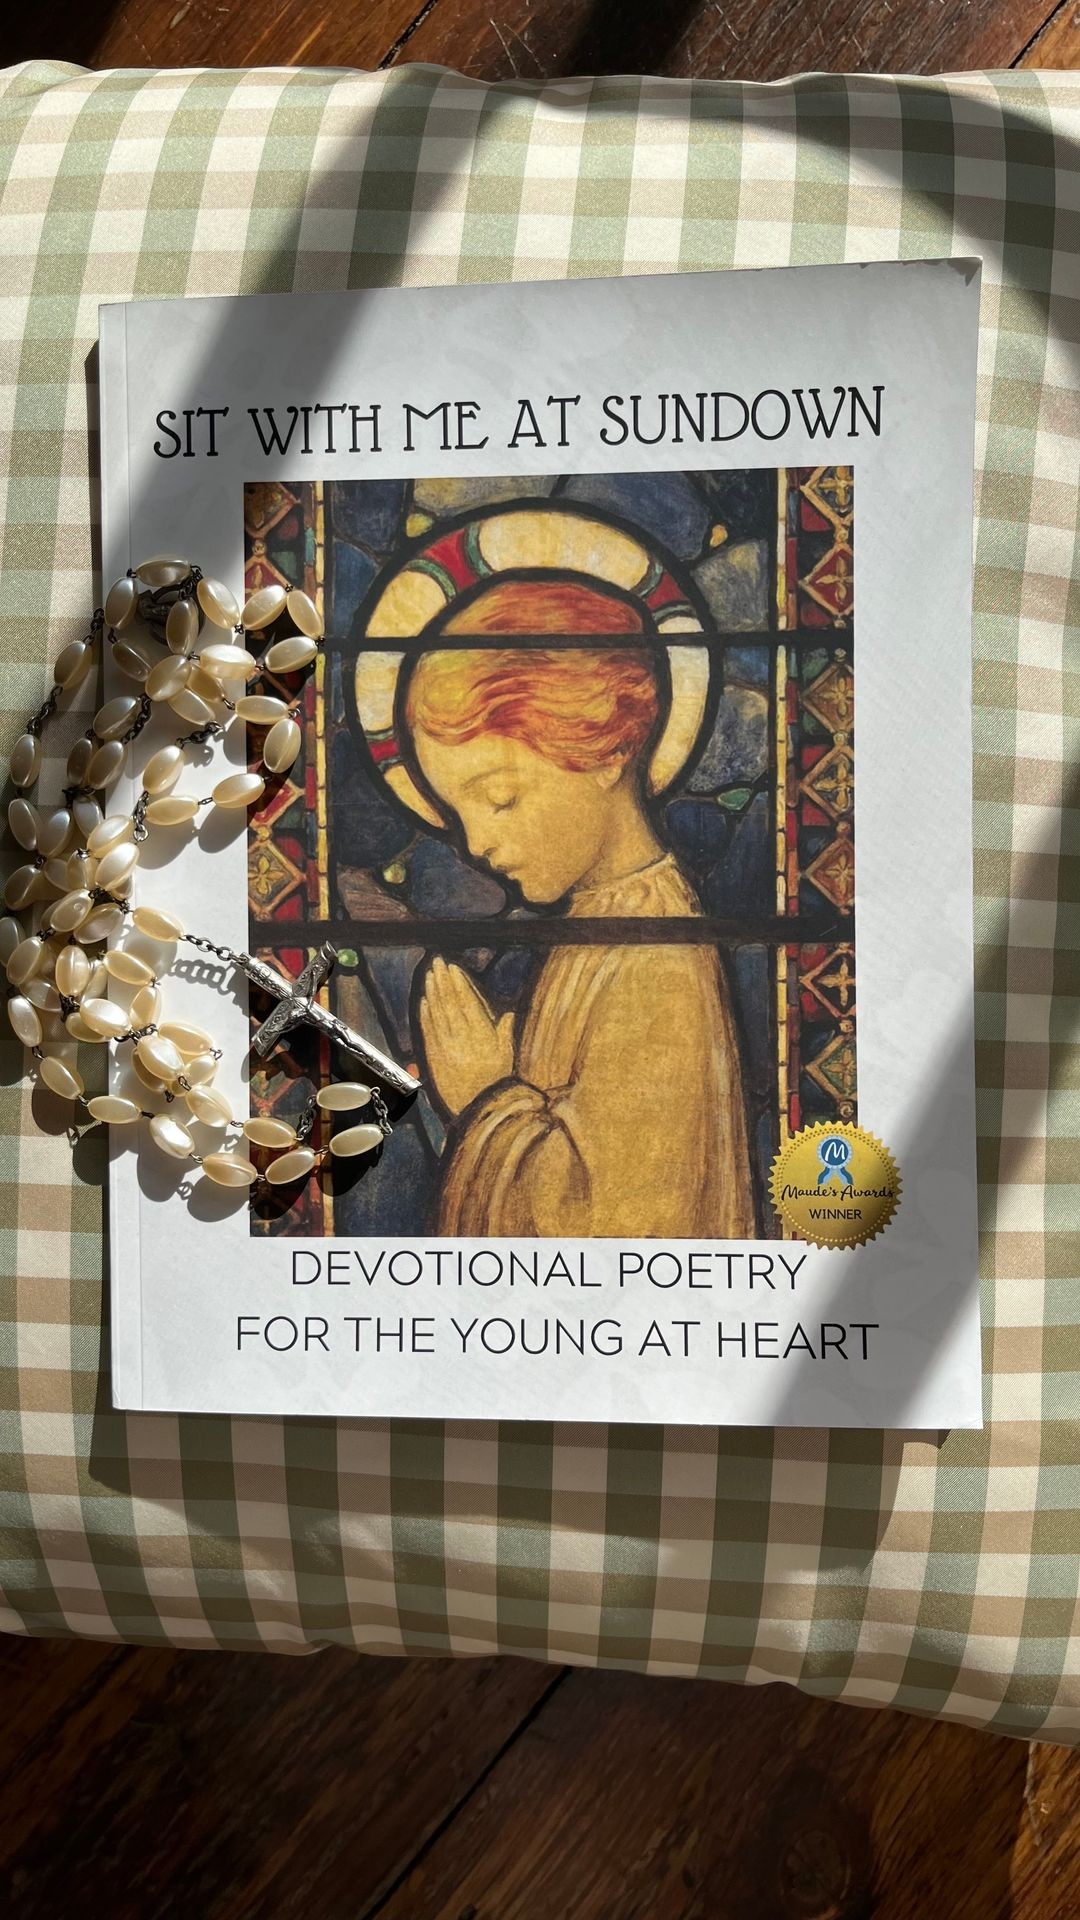 This is a photo of a dementia friendly books of hymns and a pearlized rosary beads lying on a cushion in a sunlit room.  NANA’S BOOKS series of nostalgic prayers, psalms and poetry make wonderful gifts for people to share. Large print books with adaptive formats ease reading and create opportunities for frustration free visiting. Caregivers and people living with memory challenges alike appreciate these thoughtful dementia resources. 